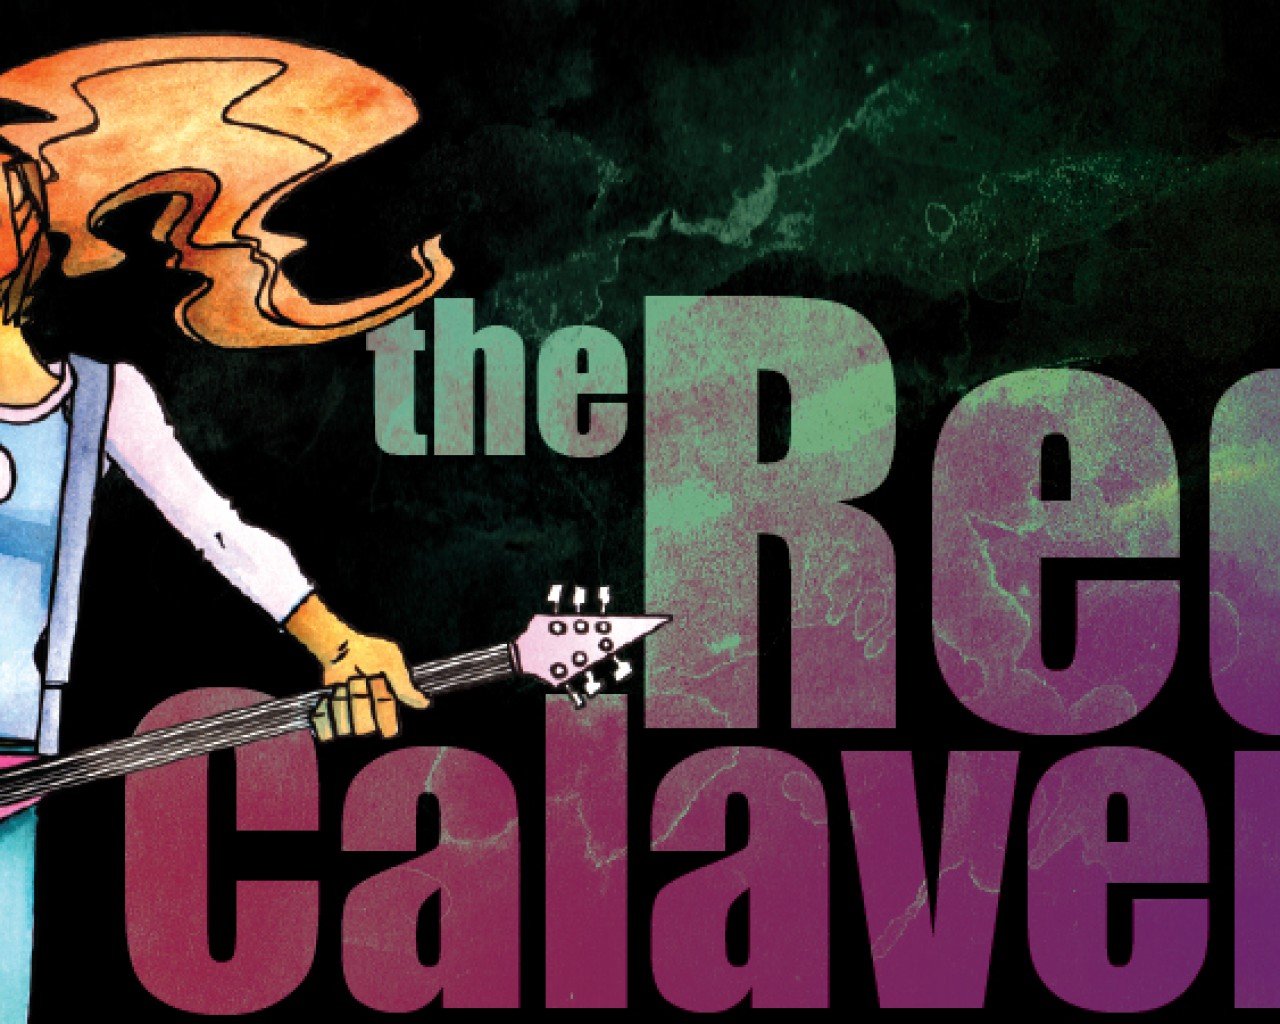 Poster Image for The Red Calaveras